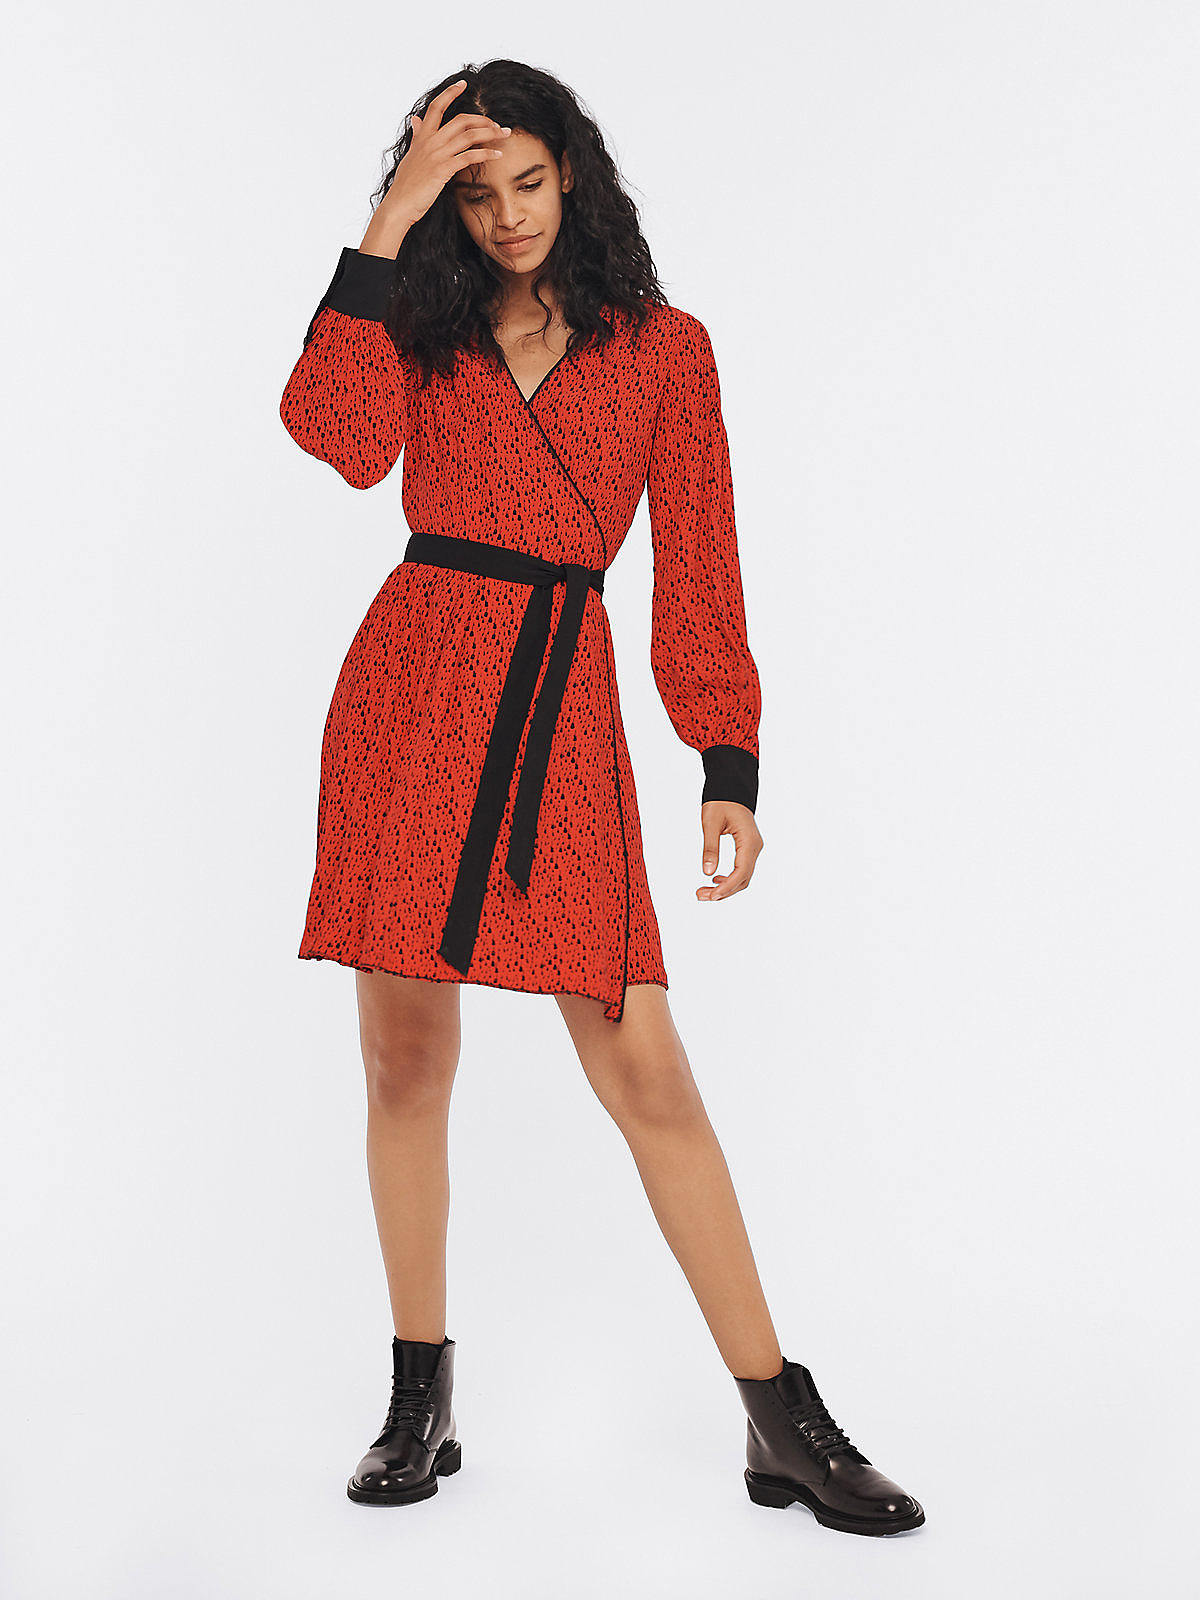 DVF Has Top-Tier Wrap Dresses on Sale Right Now: Our Picks | Us Weekly